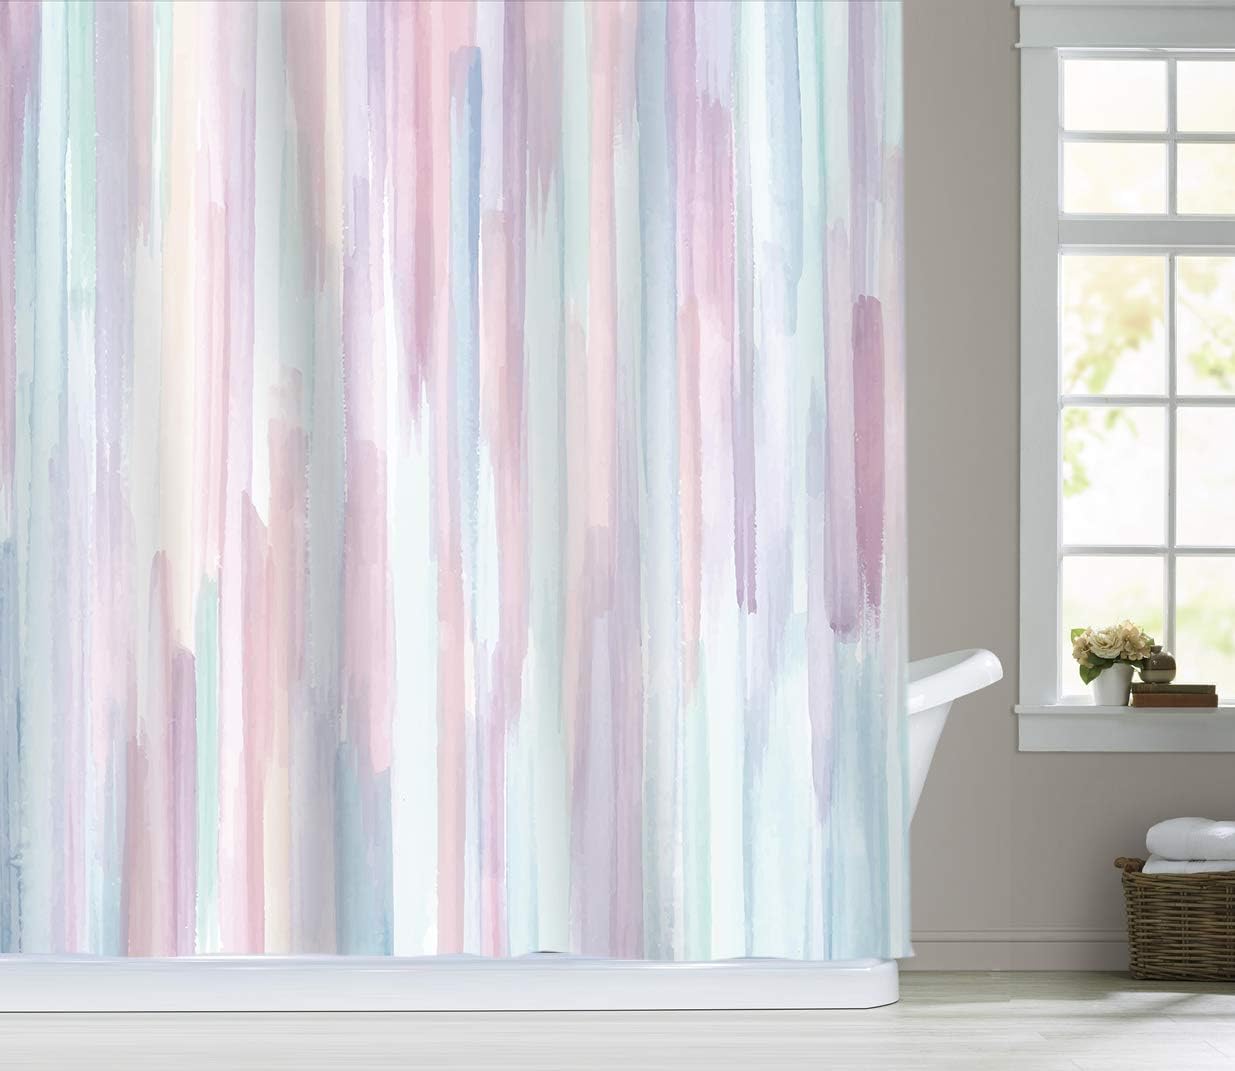 Sunlit Design Watercolor Painting with Macaron Pink and Blue Fabric Shower Curtain, Gouache Style Bathroom Decoration Curtains, Machine Washable